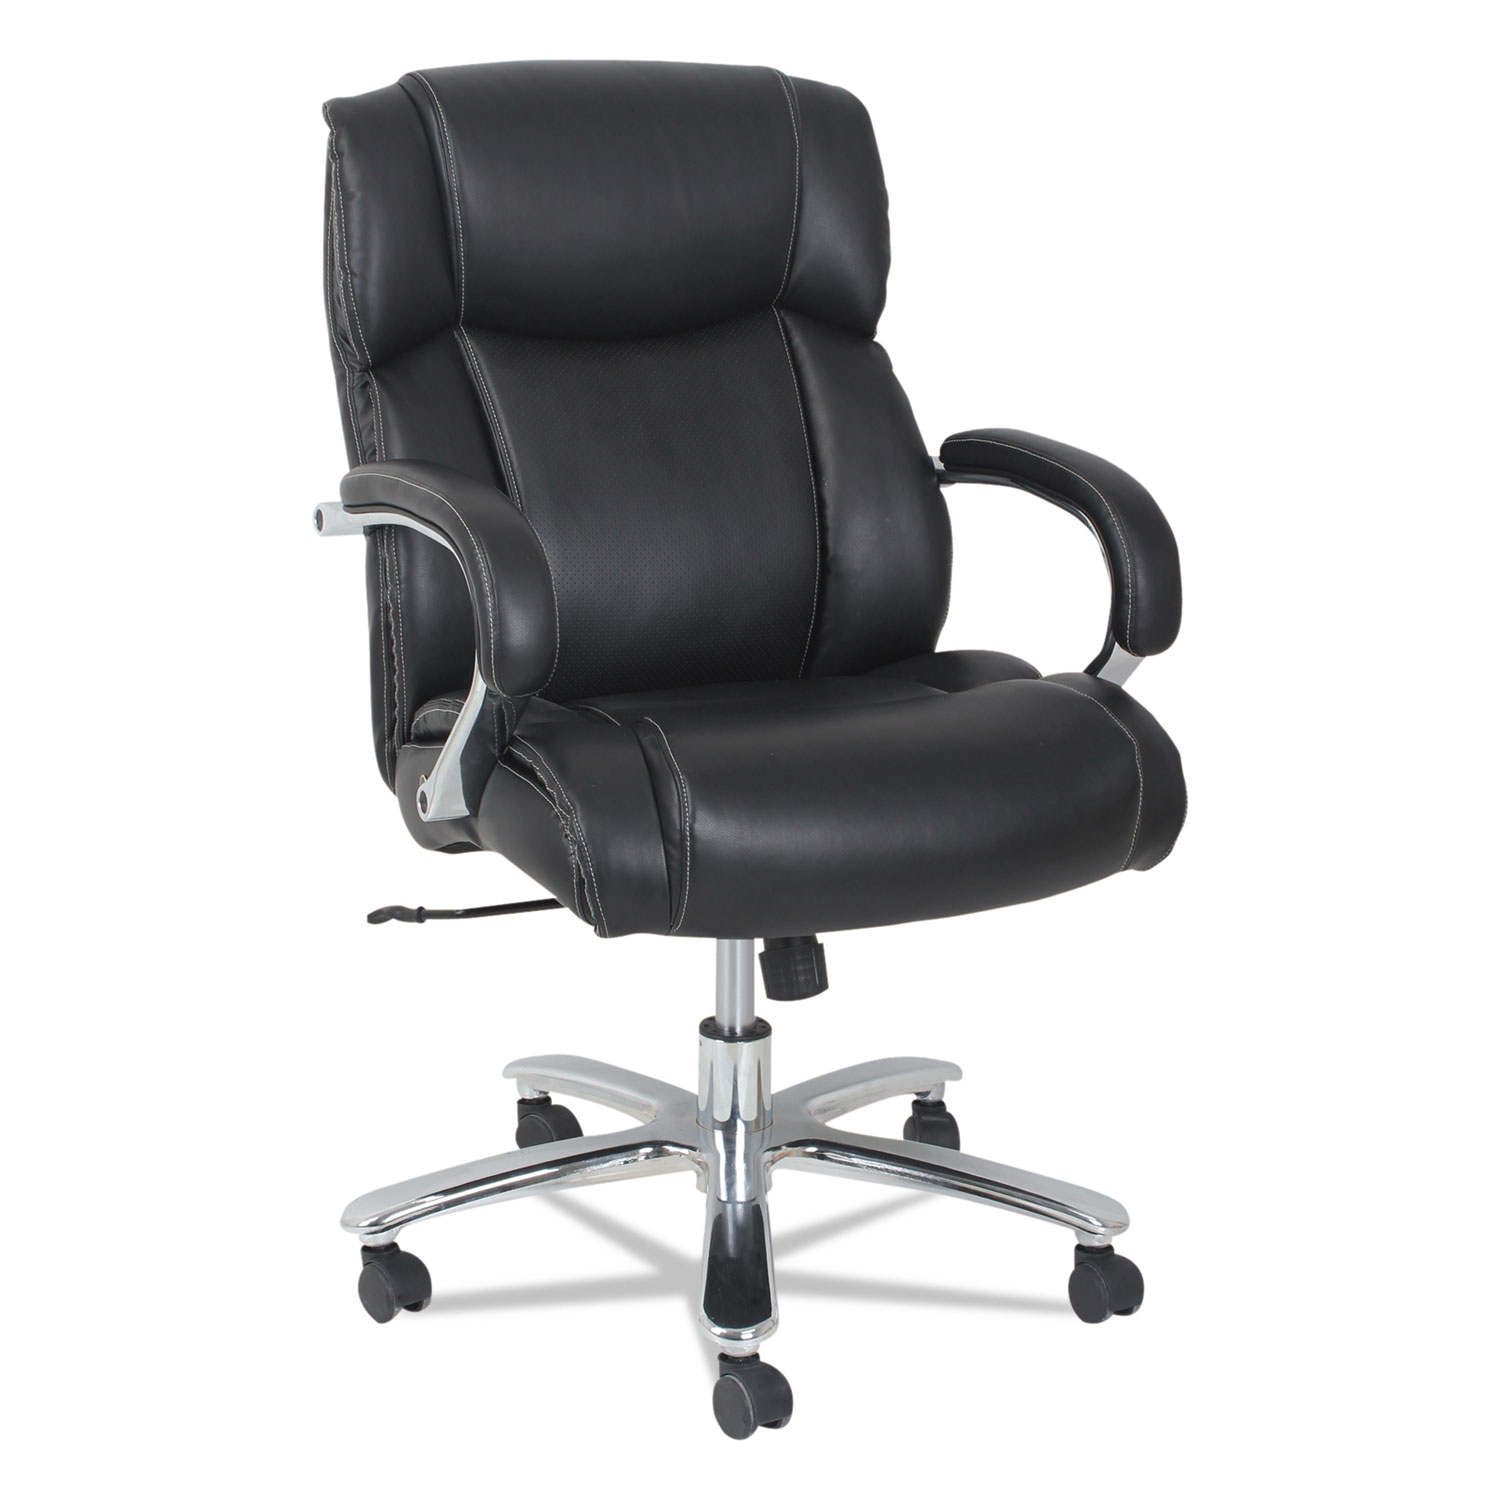  Alera ALEMS4519 Alera Maxxis Series Big and Tall Leather Chair, Supports up to 450 lbs., Black Seat/Black Back, Chrome Base (ALEMS4519) 